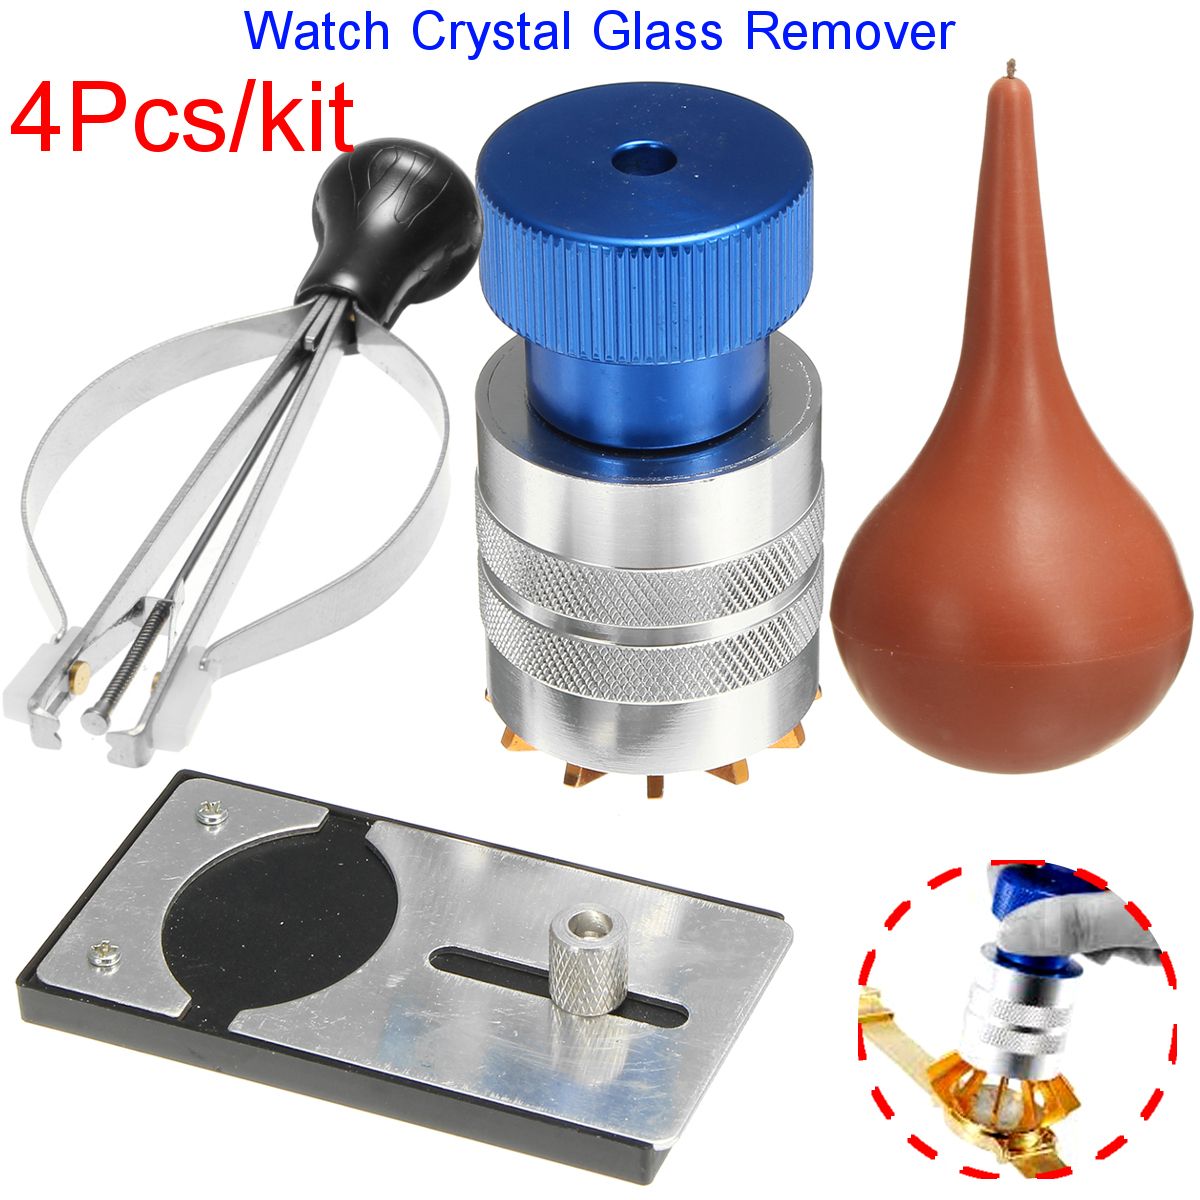 Watch-Crystal-Lift-Crystal-Glass-Remover-Inserter-Fitting-Tool-Hand-Remover-1262936